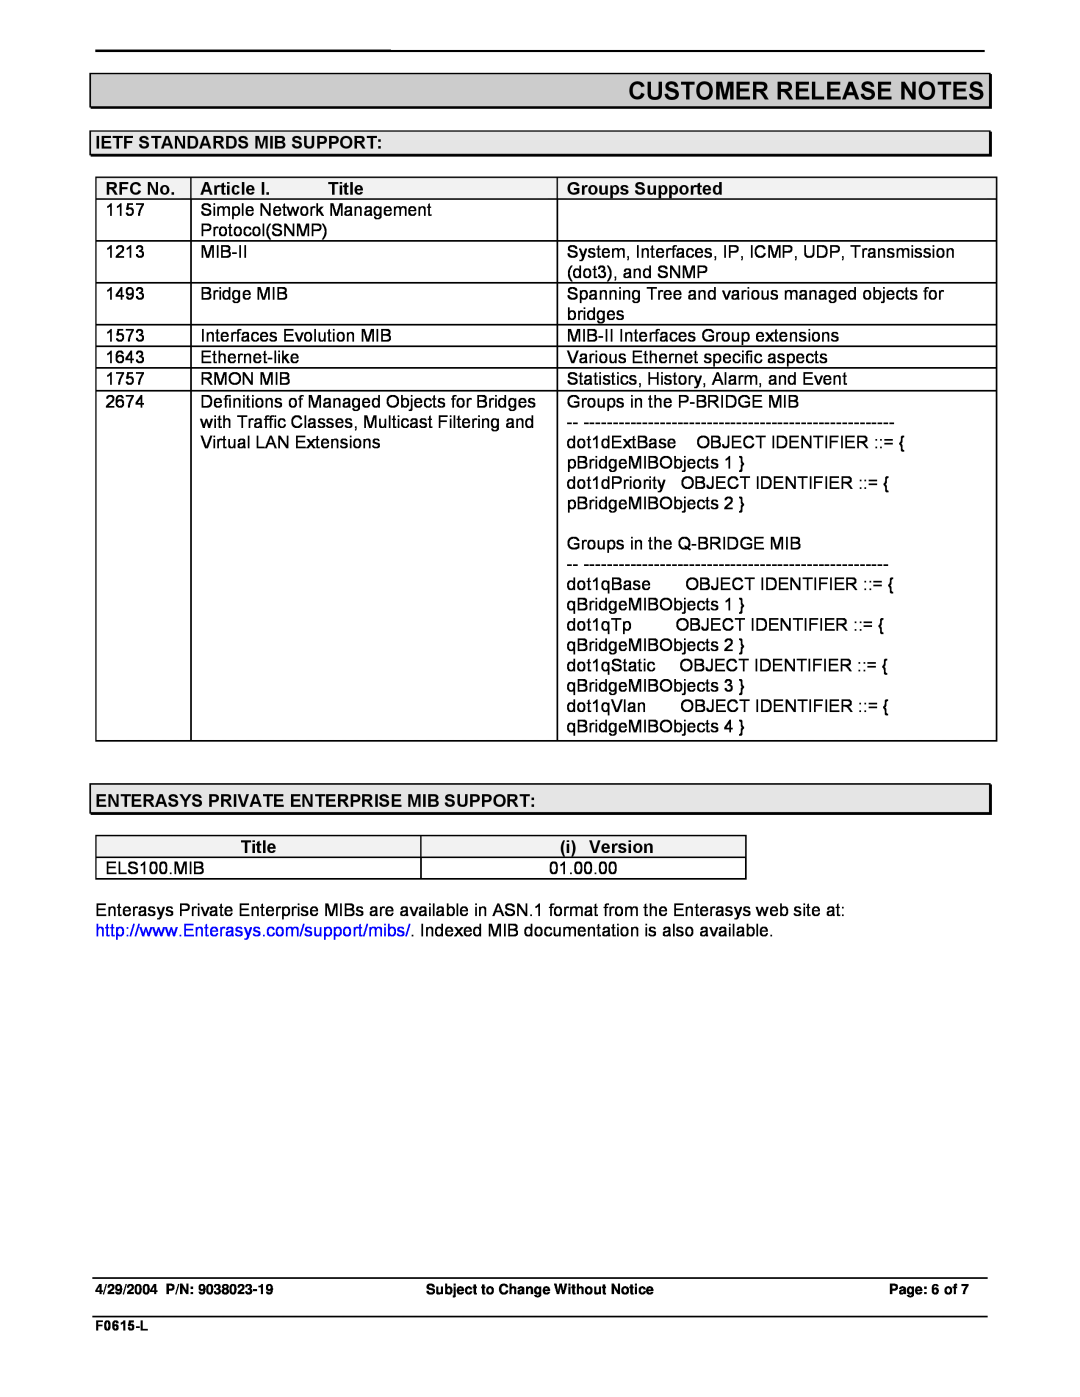 Enterasys Networks VH-2402S2 manual Customer Release Notes, Page 6 of 